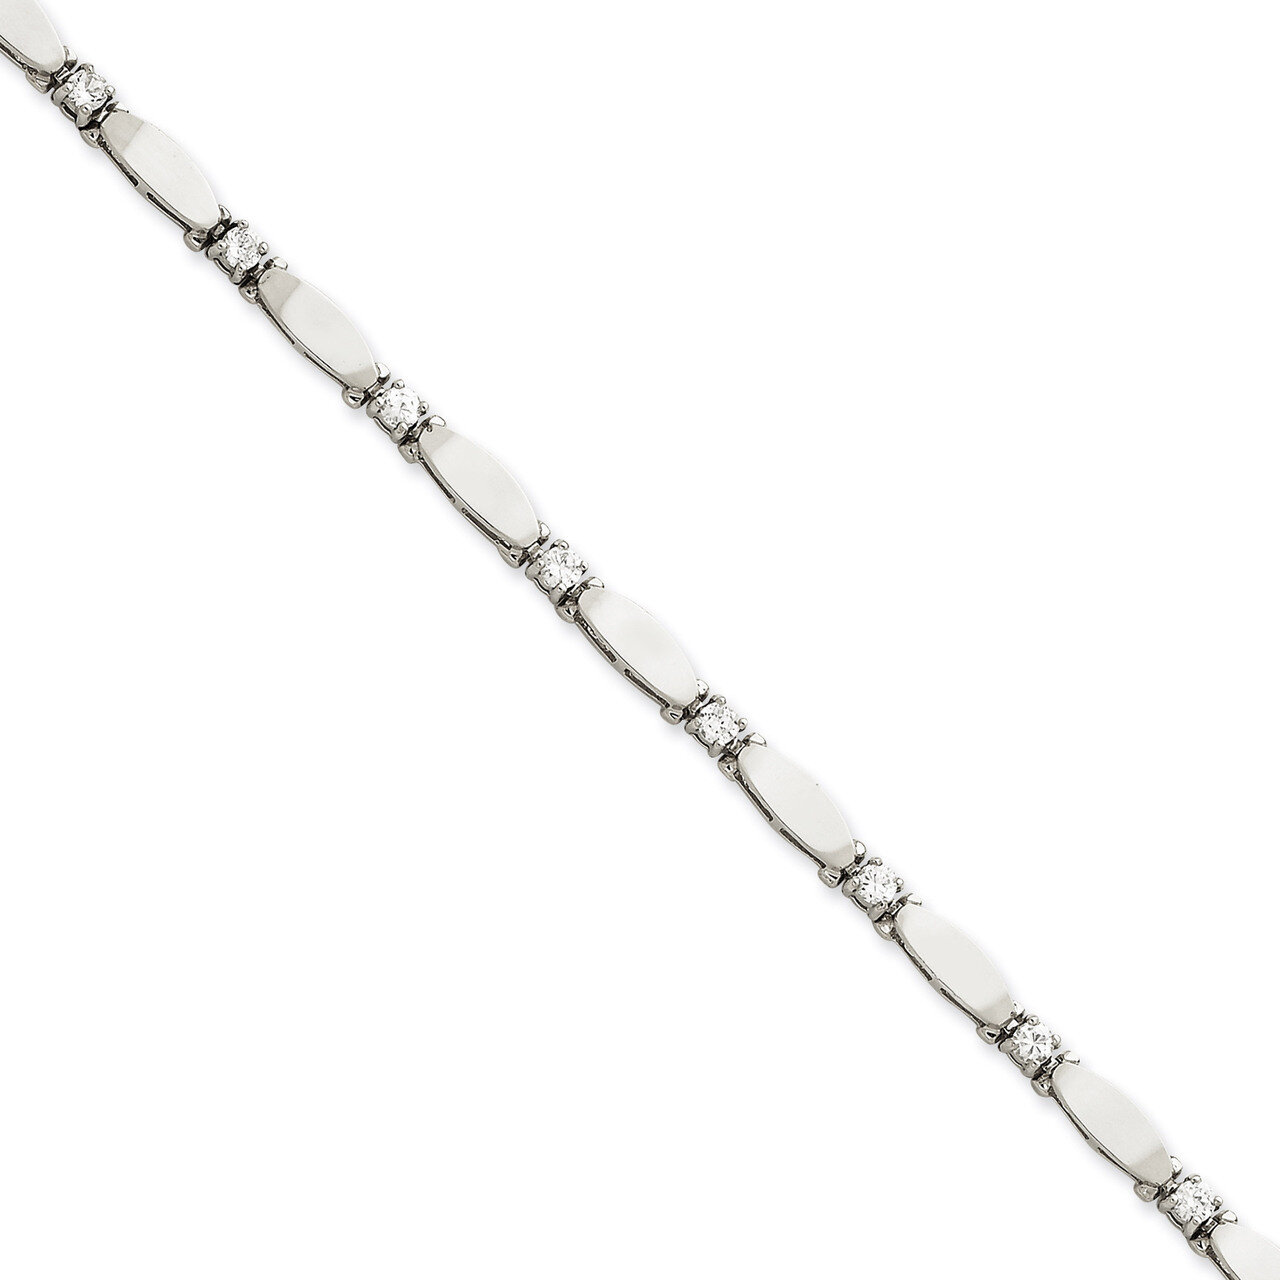 7in Holds 11 3mm Stones 1.19ct Bar Link Tennis Bracelet Mounting 14k White Gold X2361W